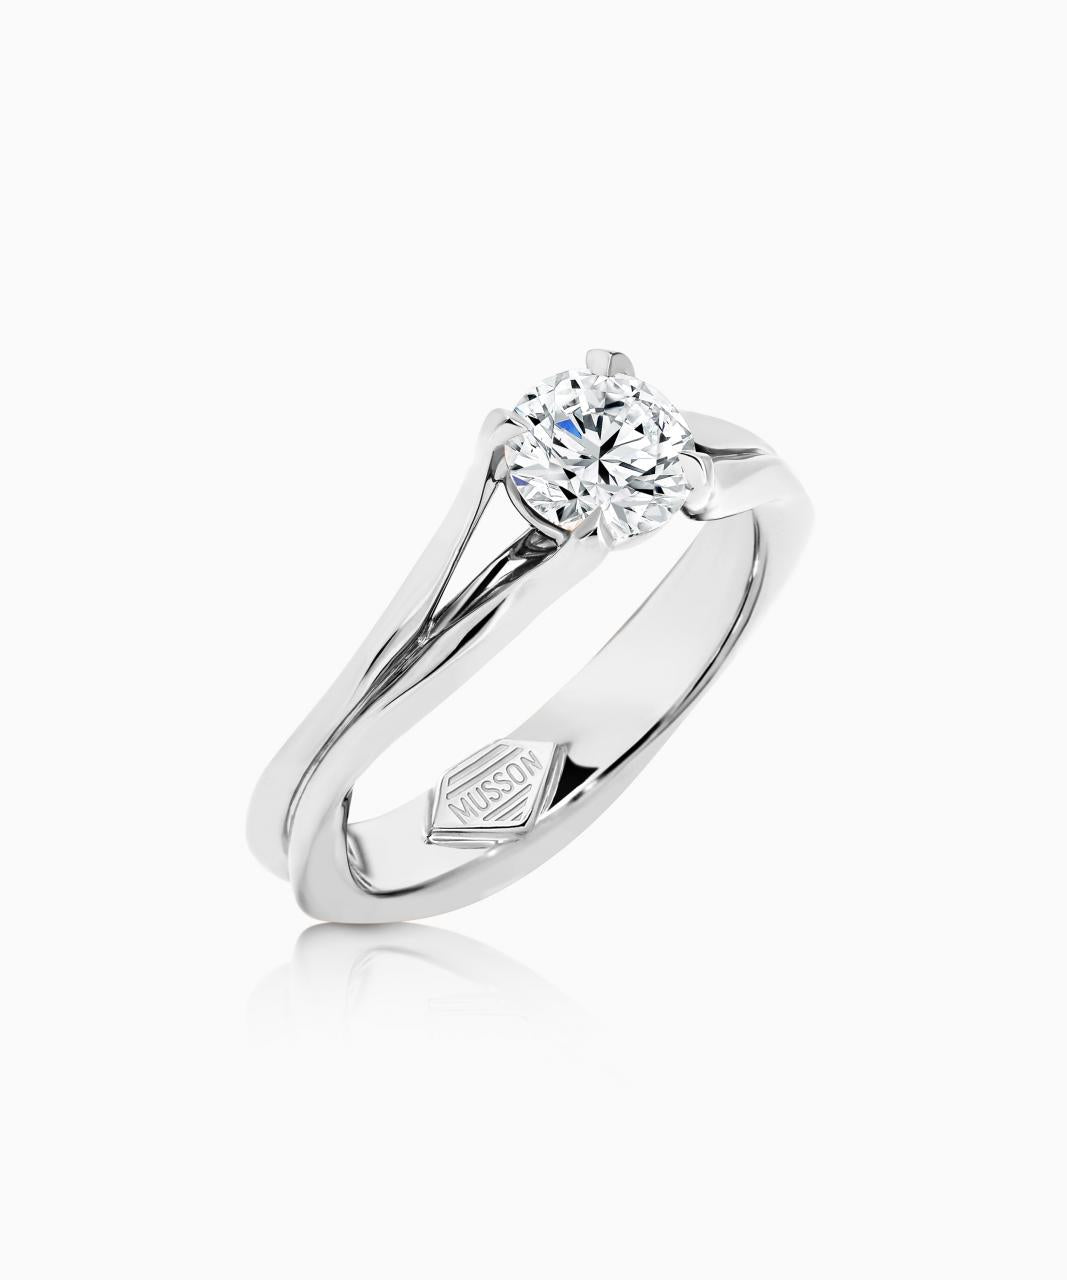 Entwined Diamond Ring